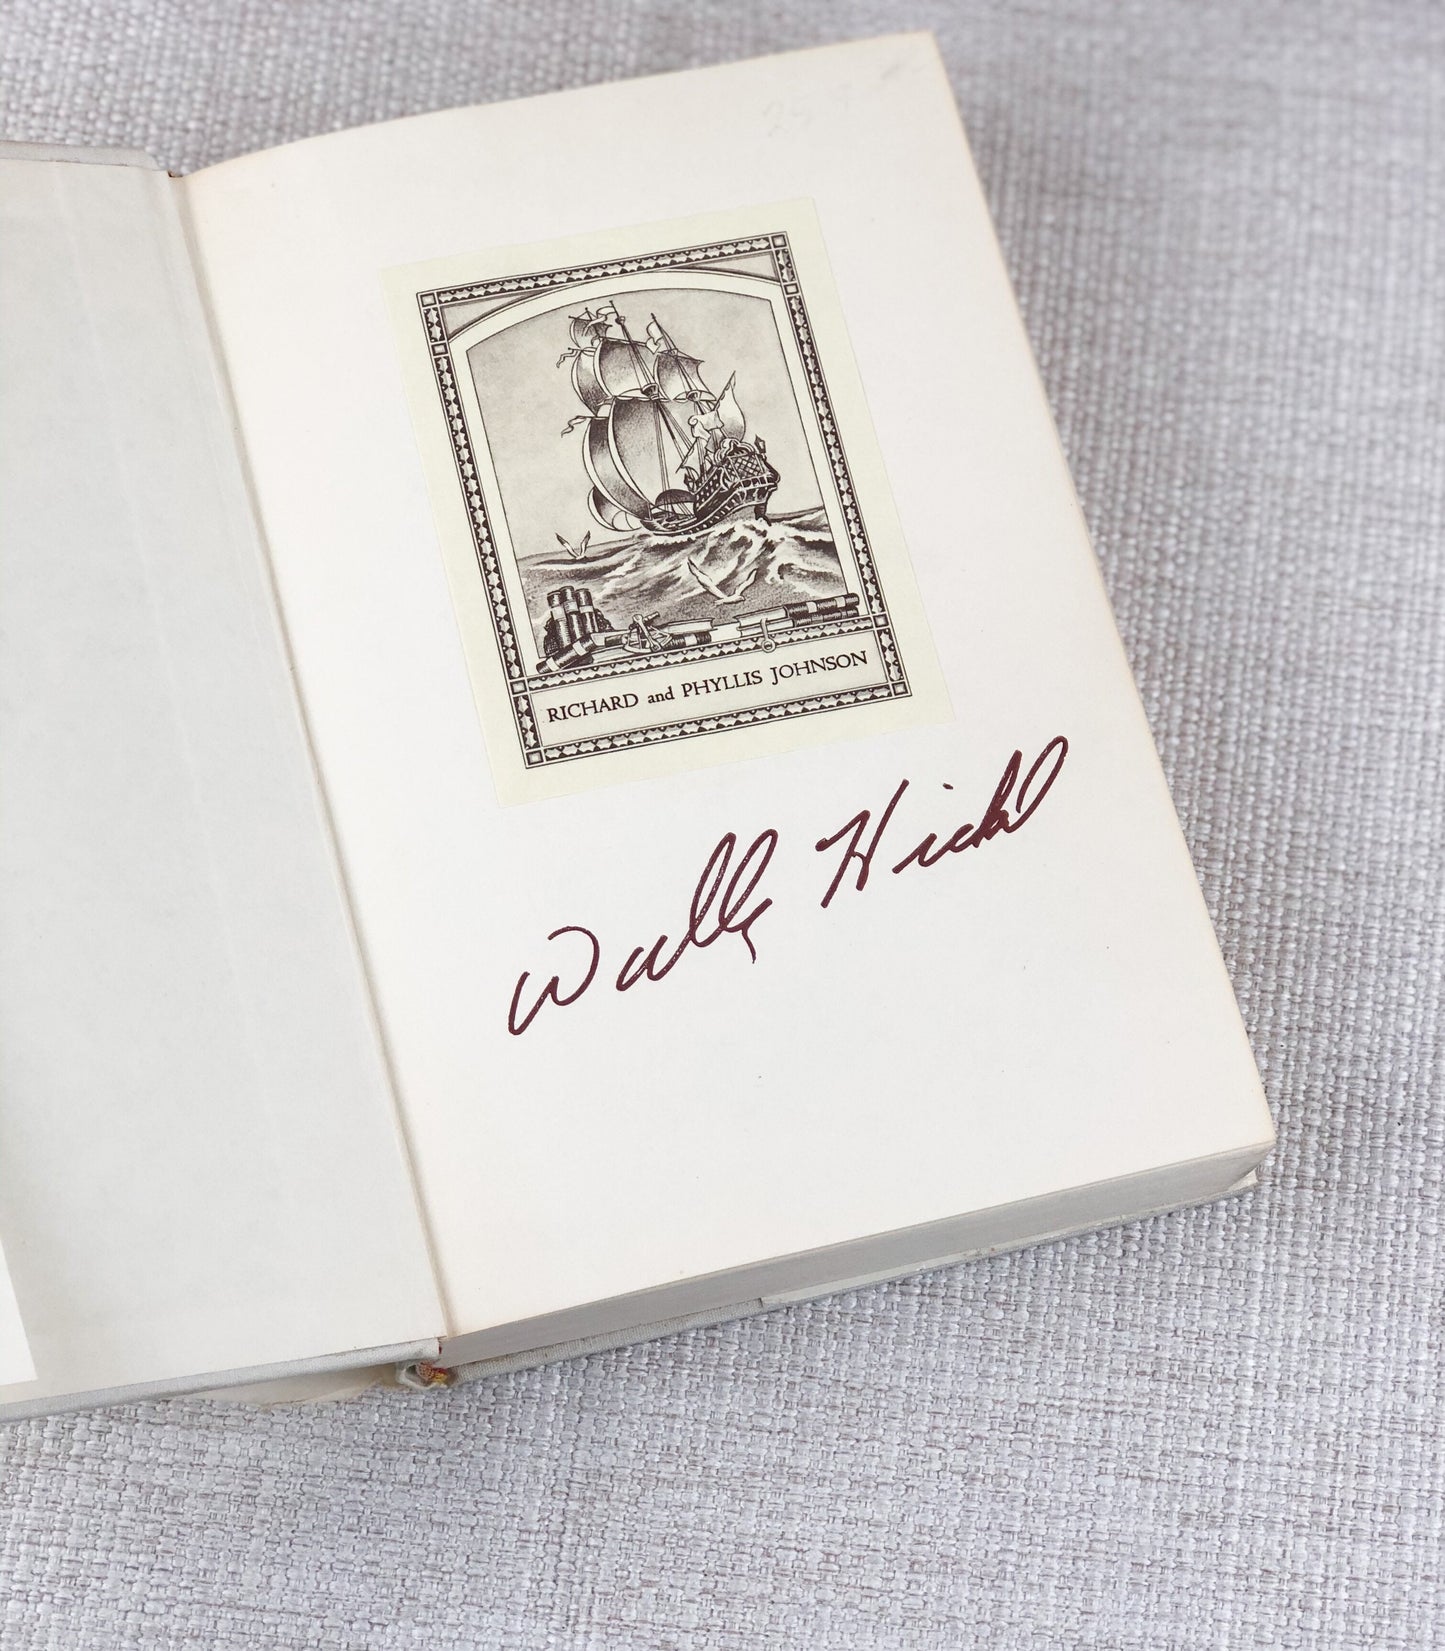 Signed Book by Walter J Hickel